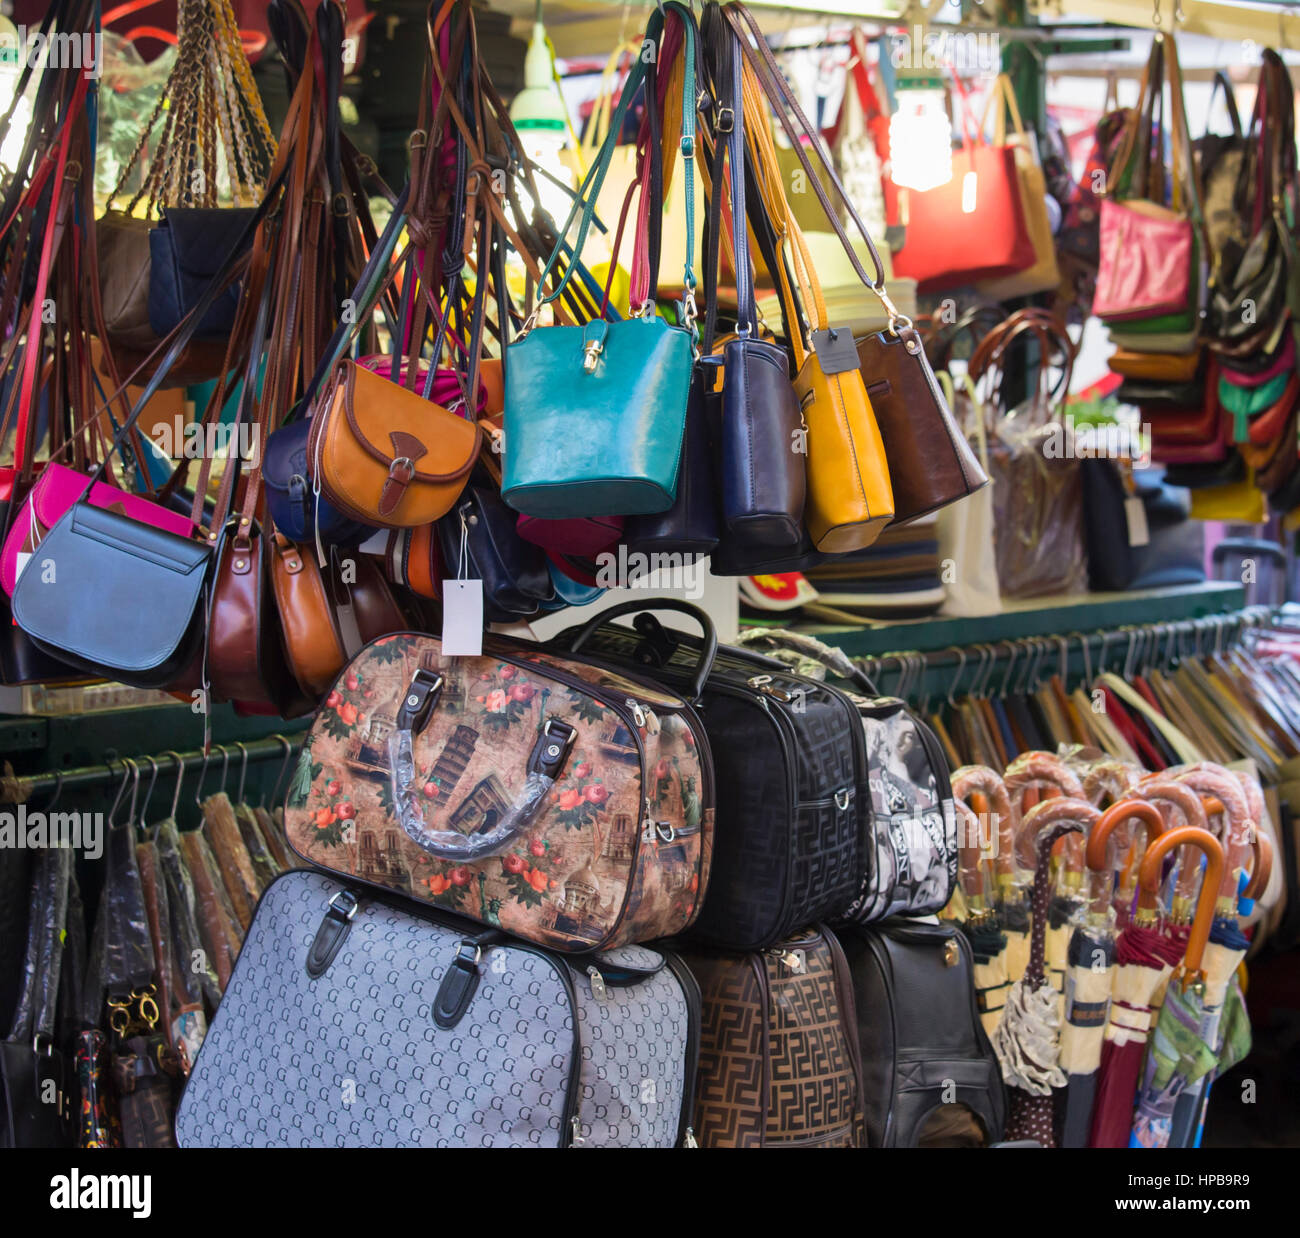 Pile of used worn secondhand bags handbags for sale Stock Photo - Alamy